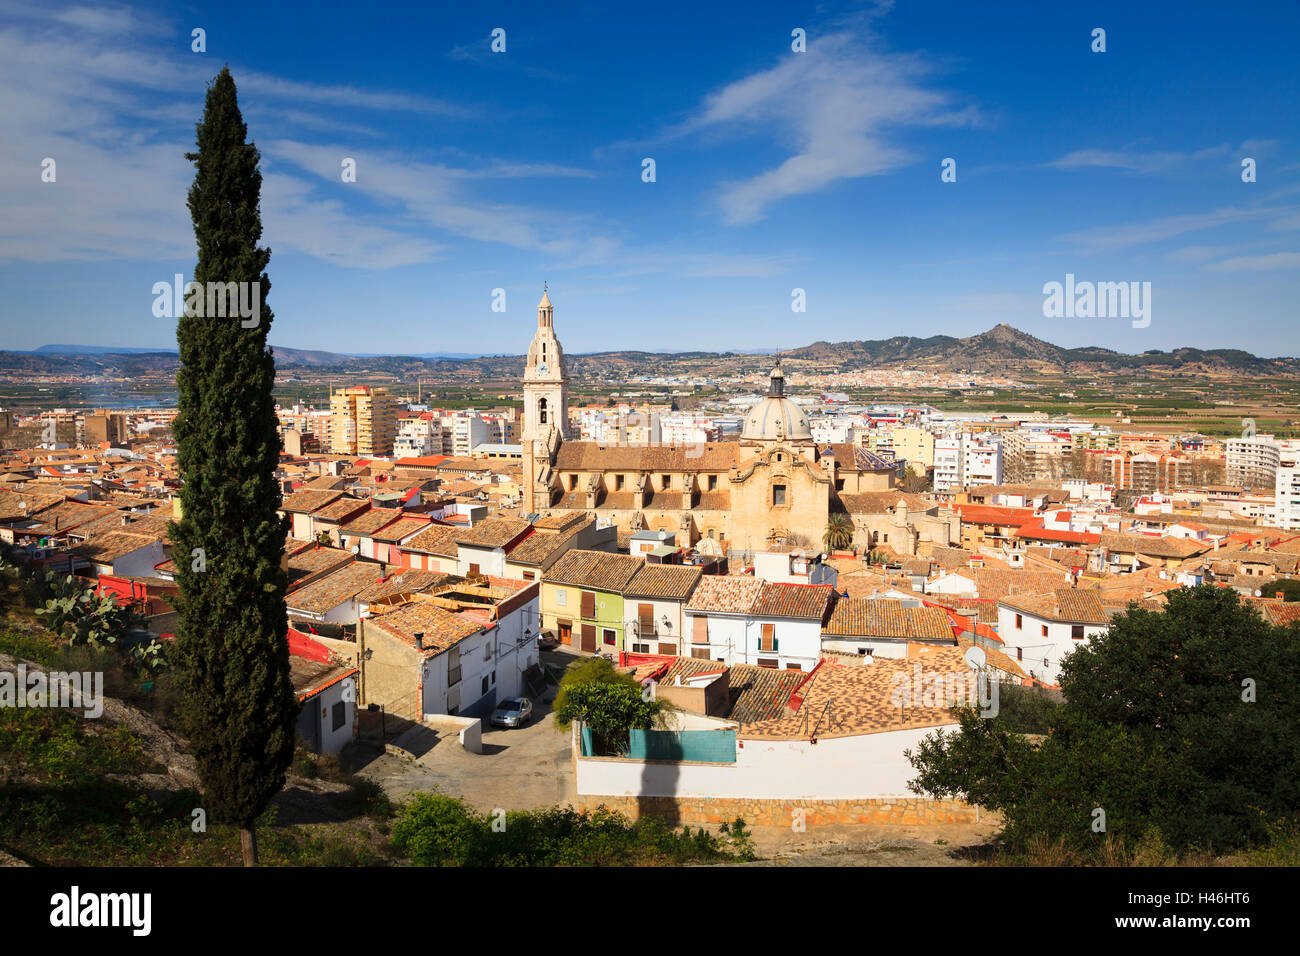 Panorama of Xativa from a high viewpoint overlooking the city Stock Photo